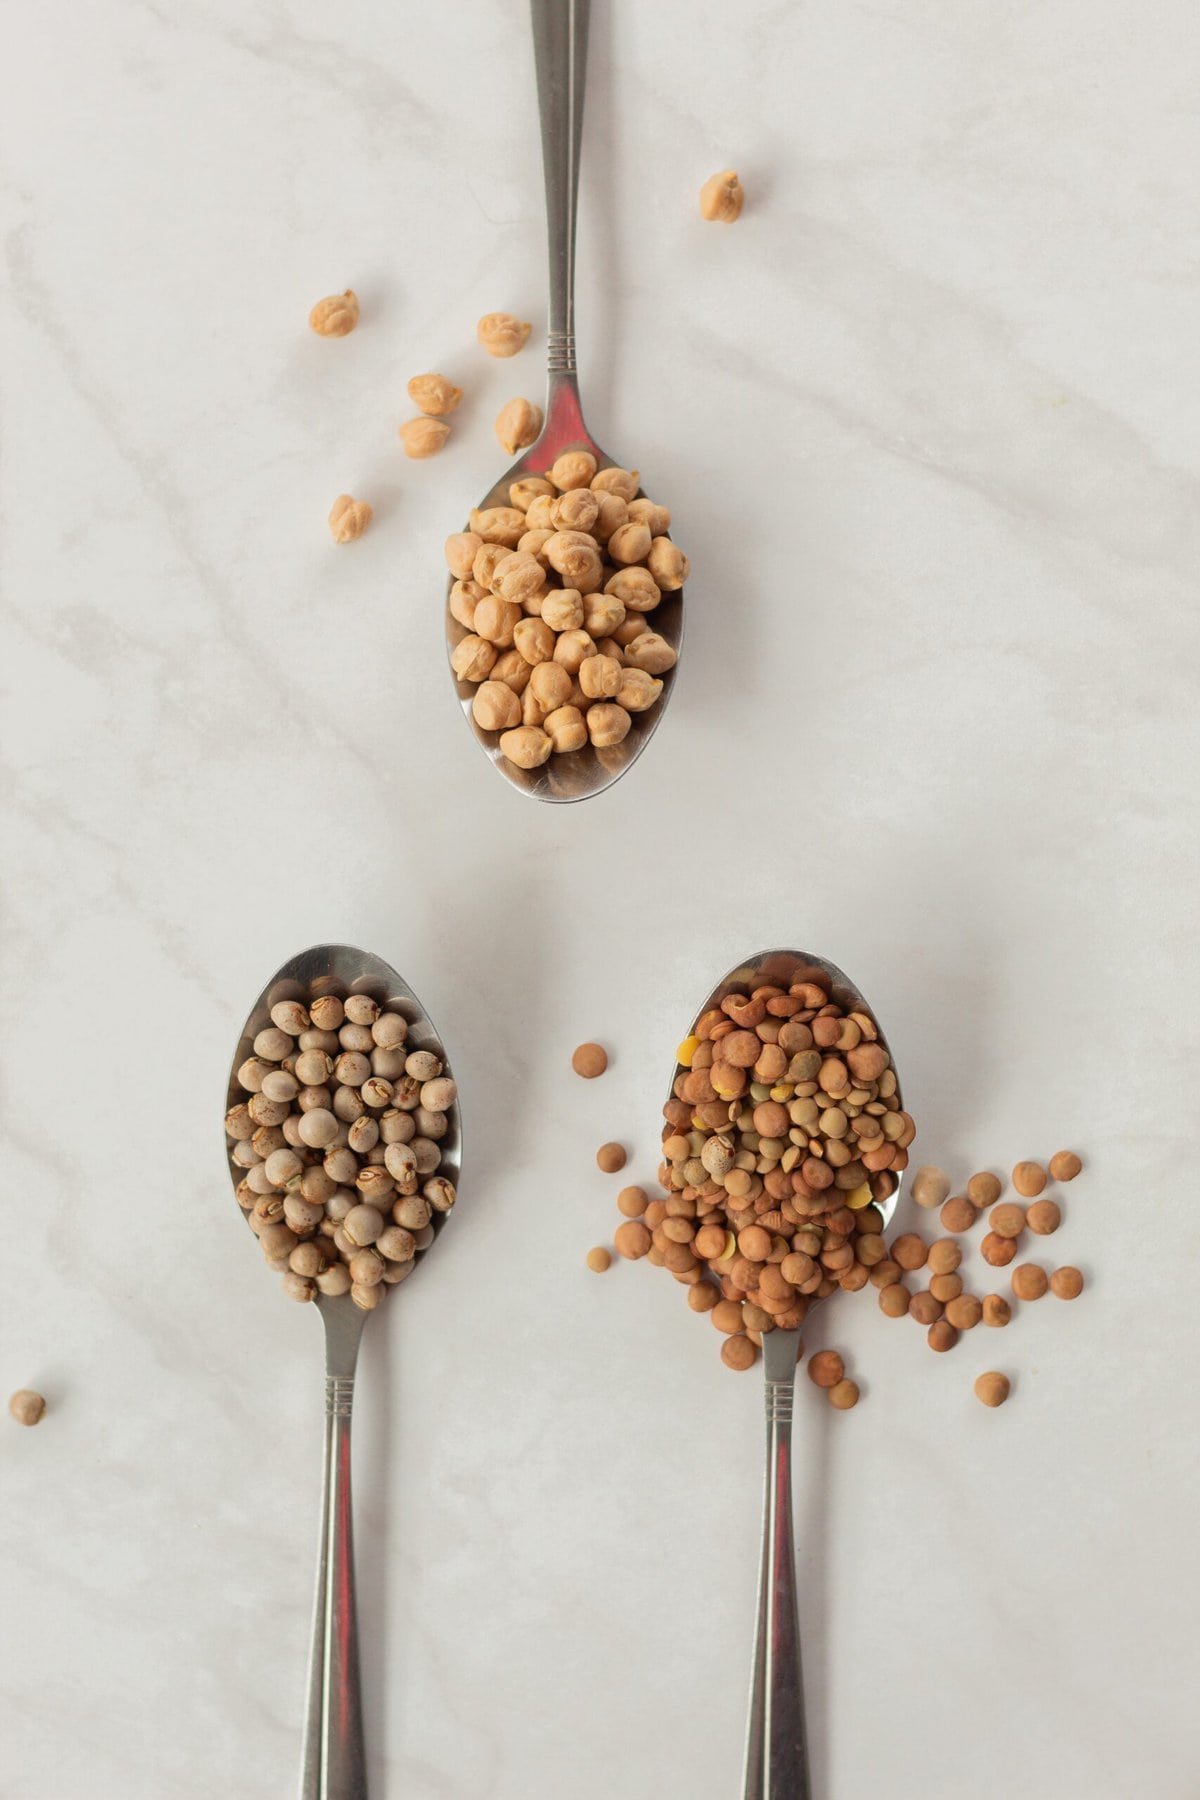 Chickpeas and lentils on spoons.